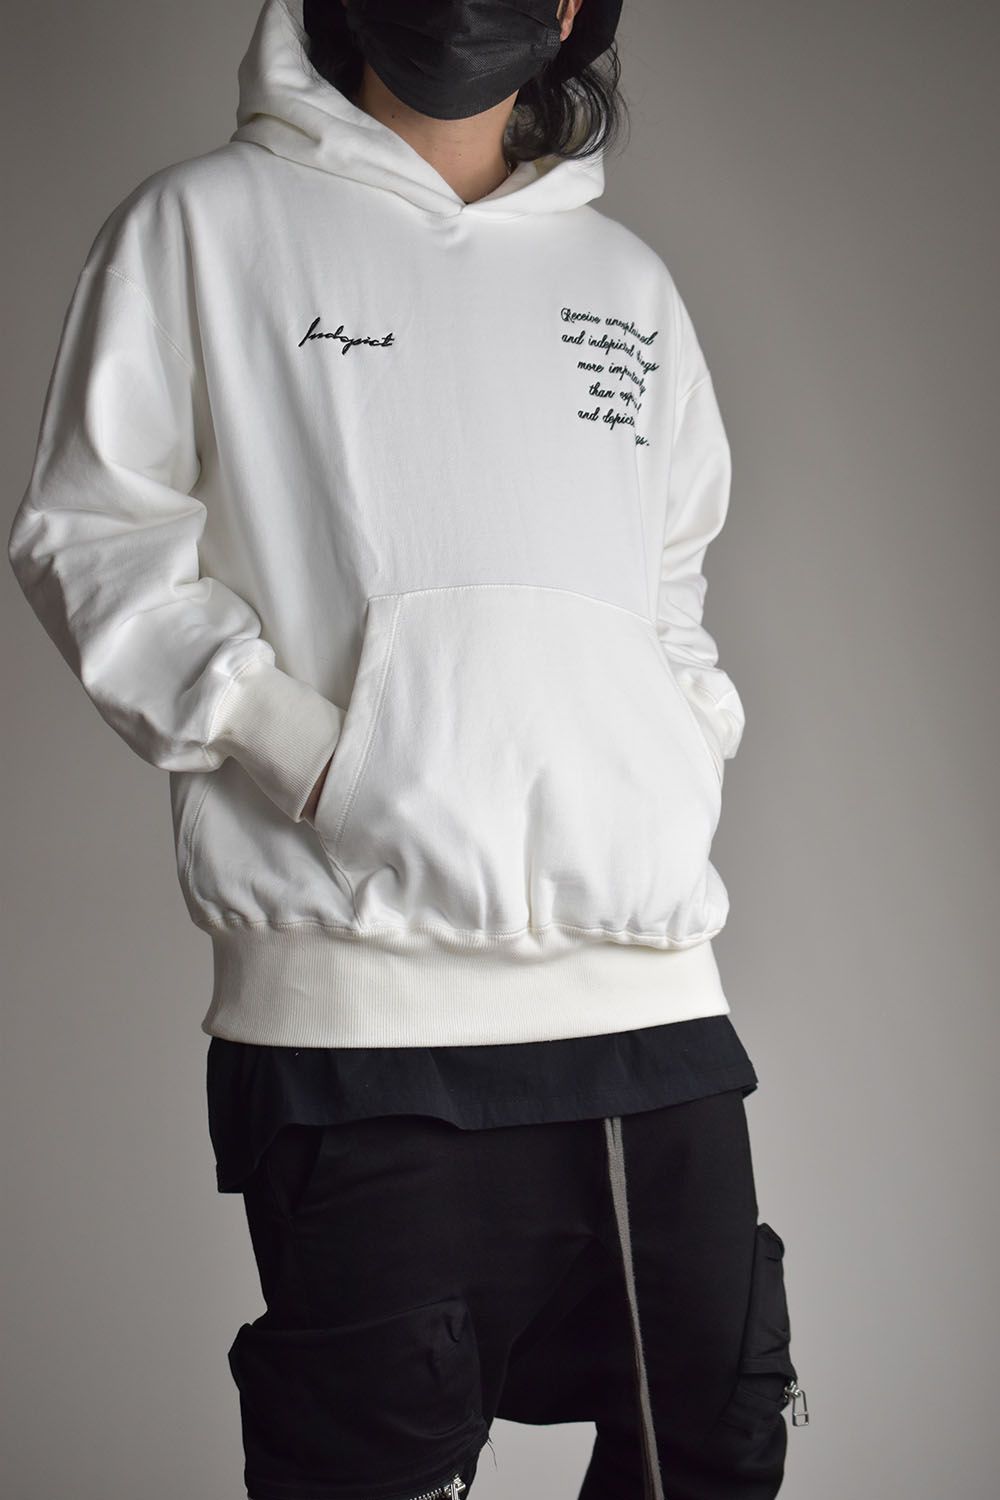 INDEPICT Embroidery PO Hooded"White"/インディピクト刺繍プルオーバーフーデッド"ホワイト"